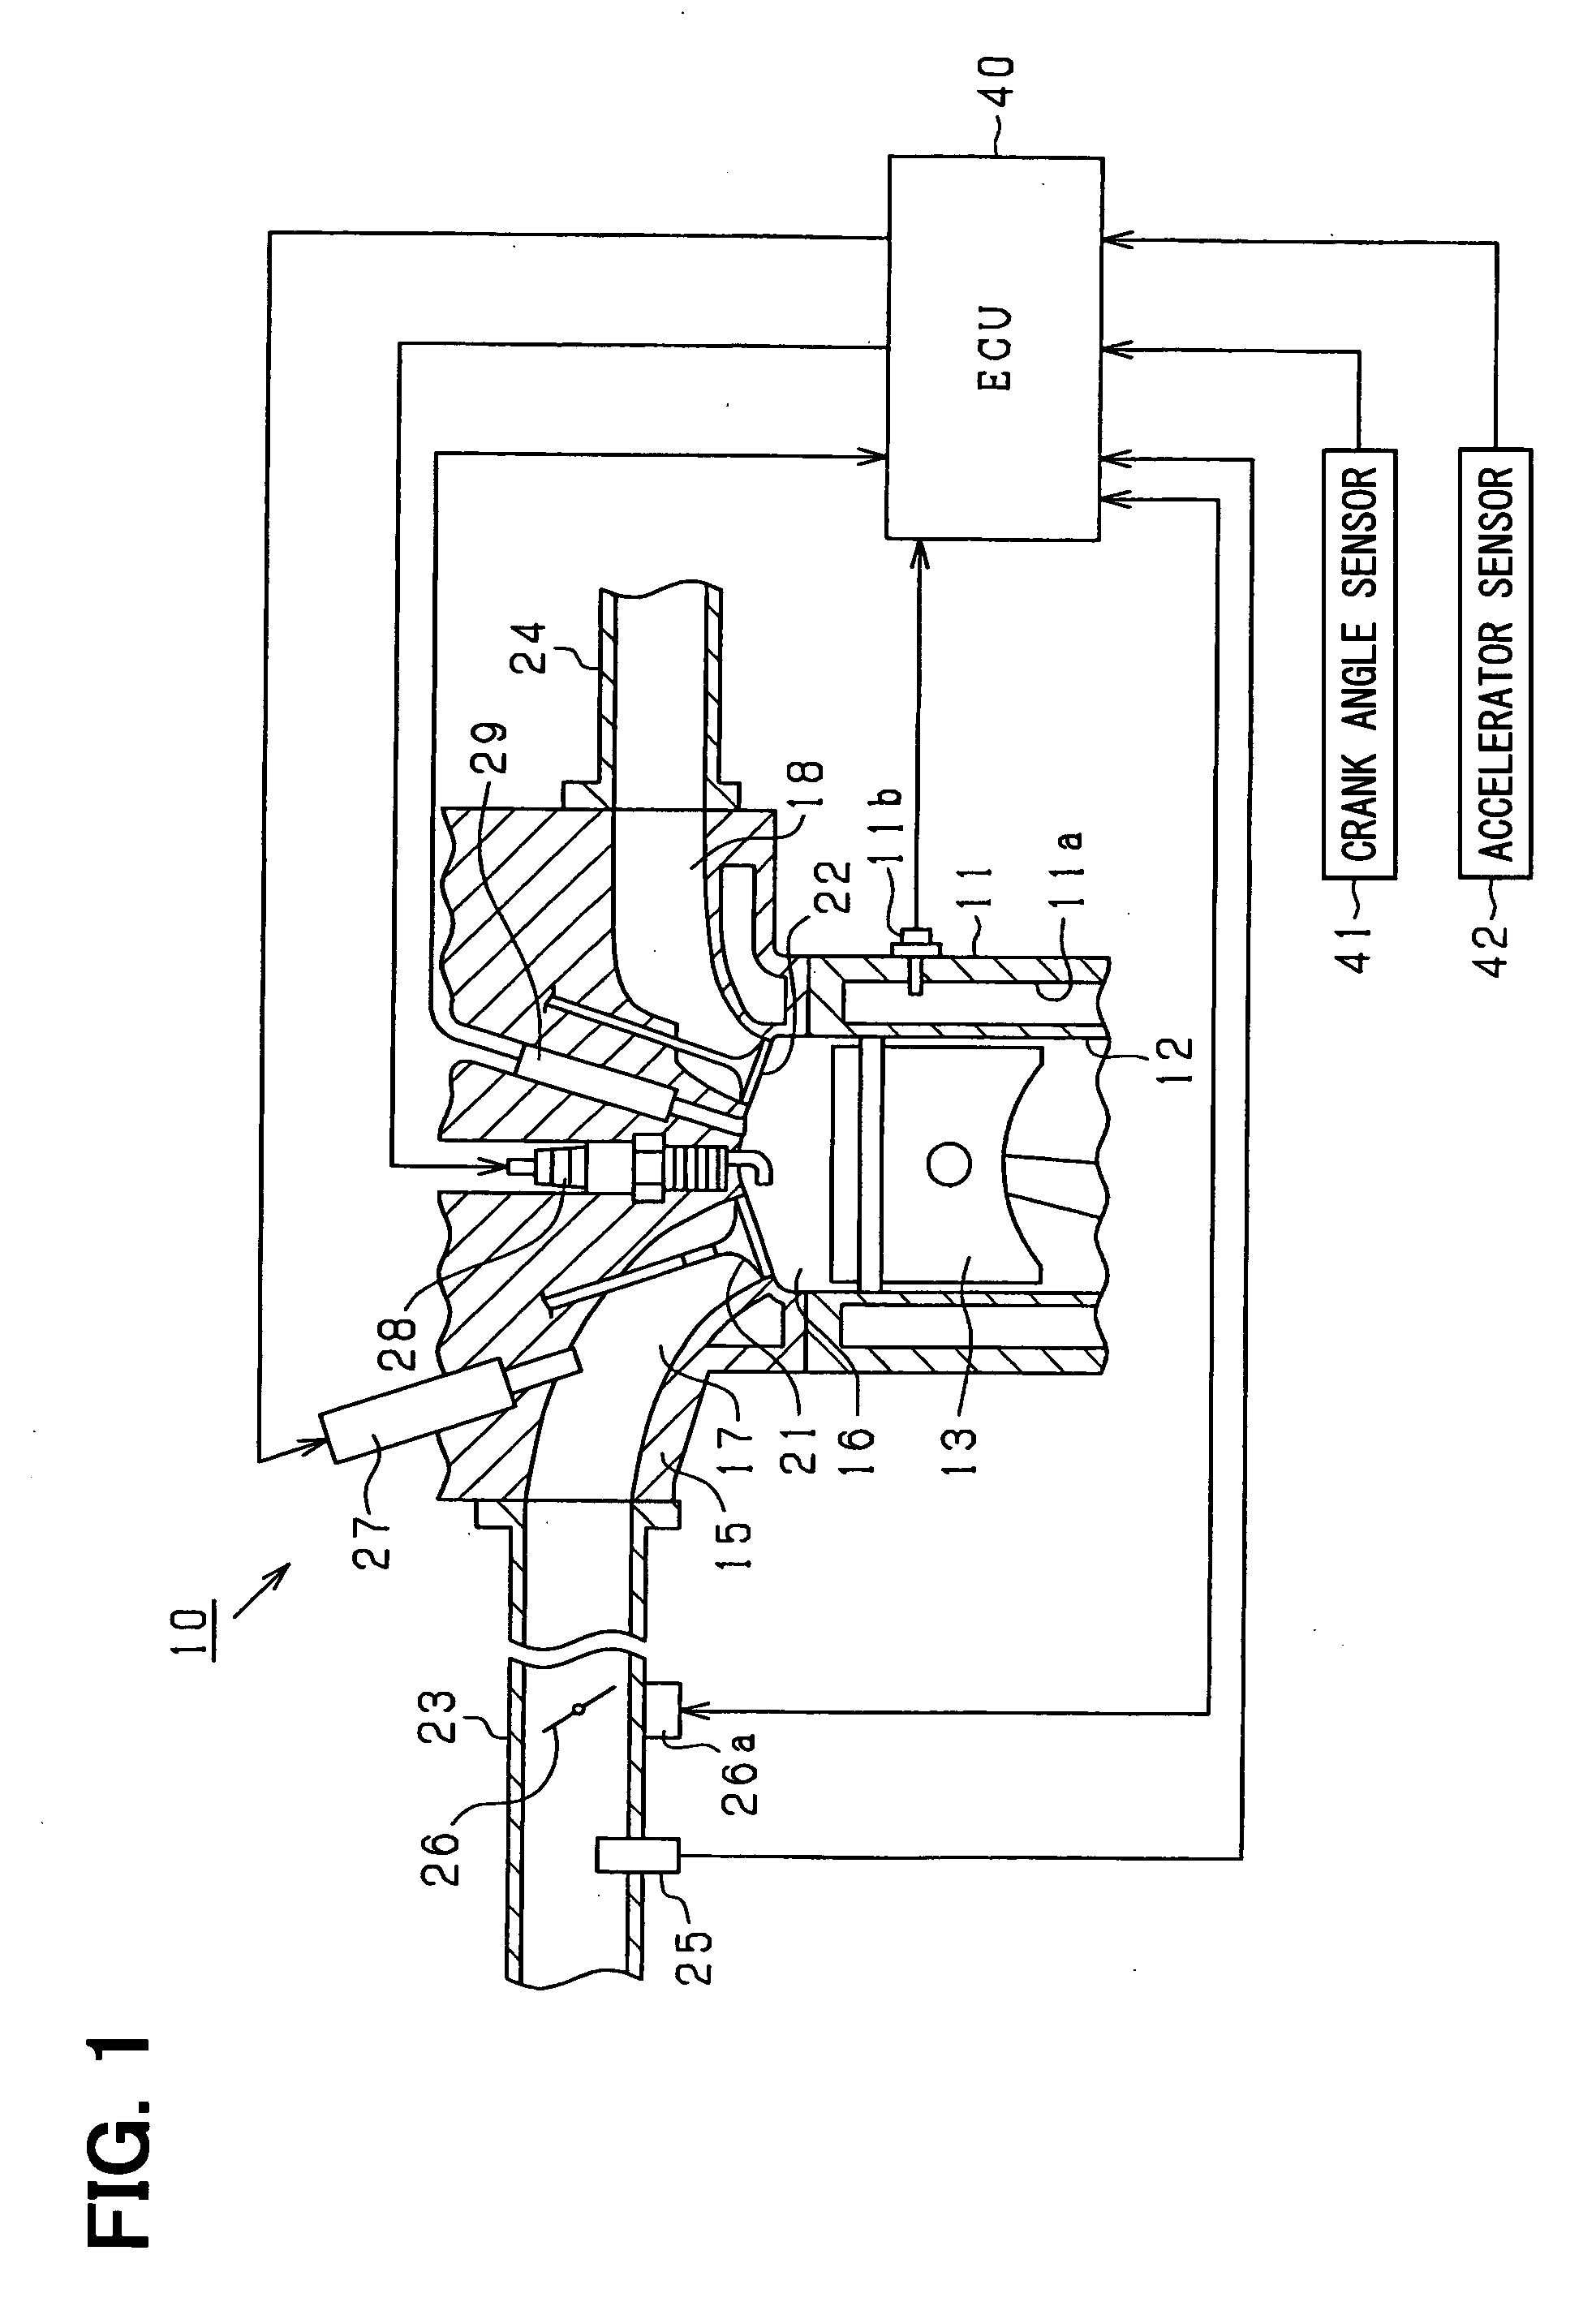 Engine control, fuel property detection and determination apparatus, and method for the same